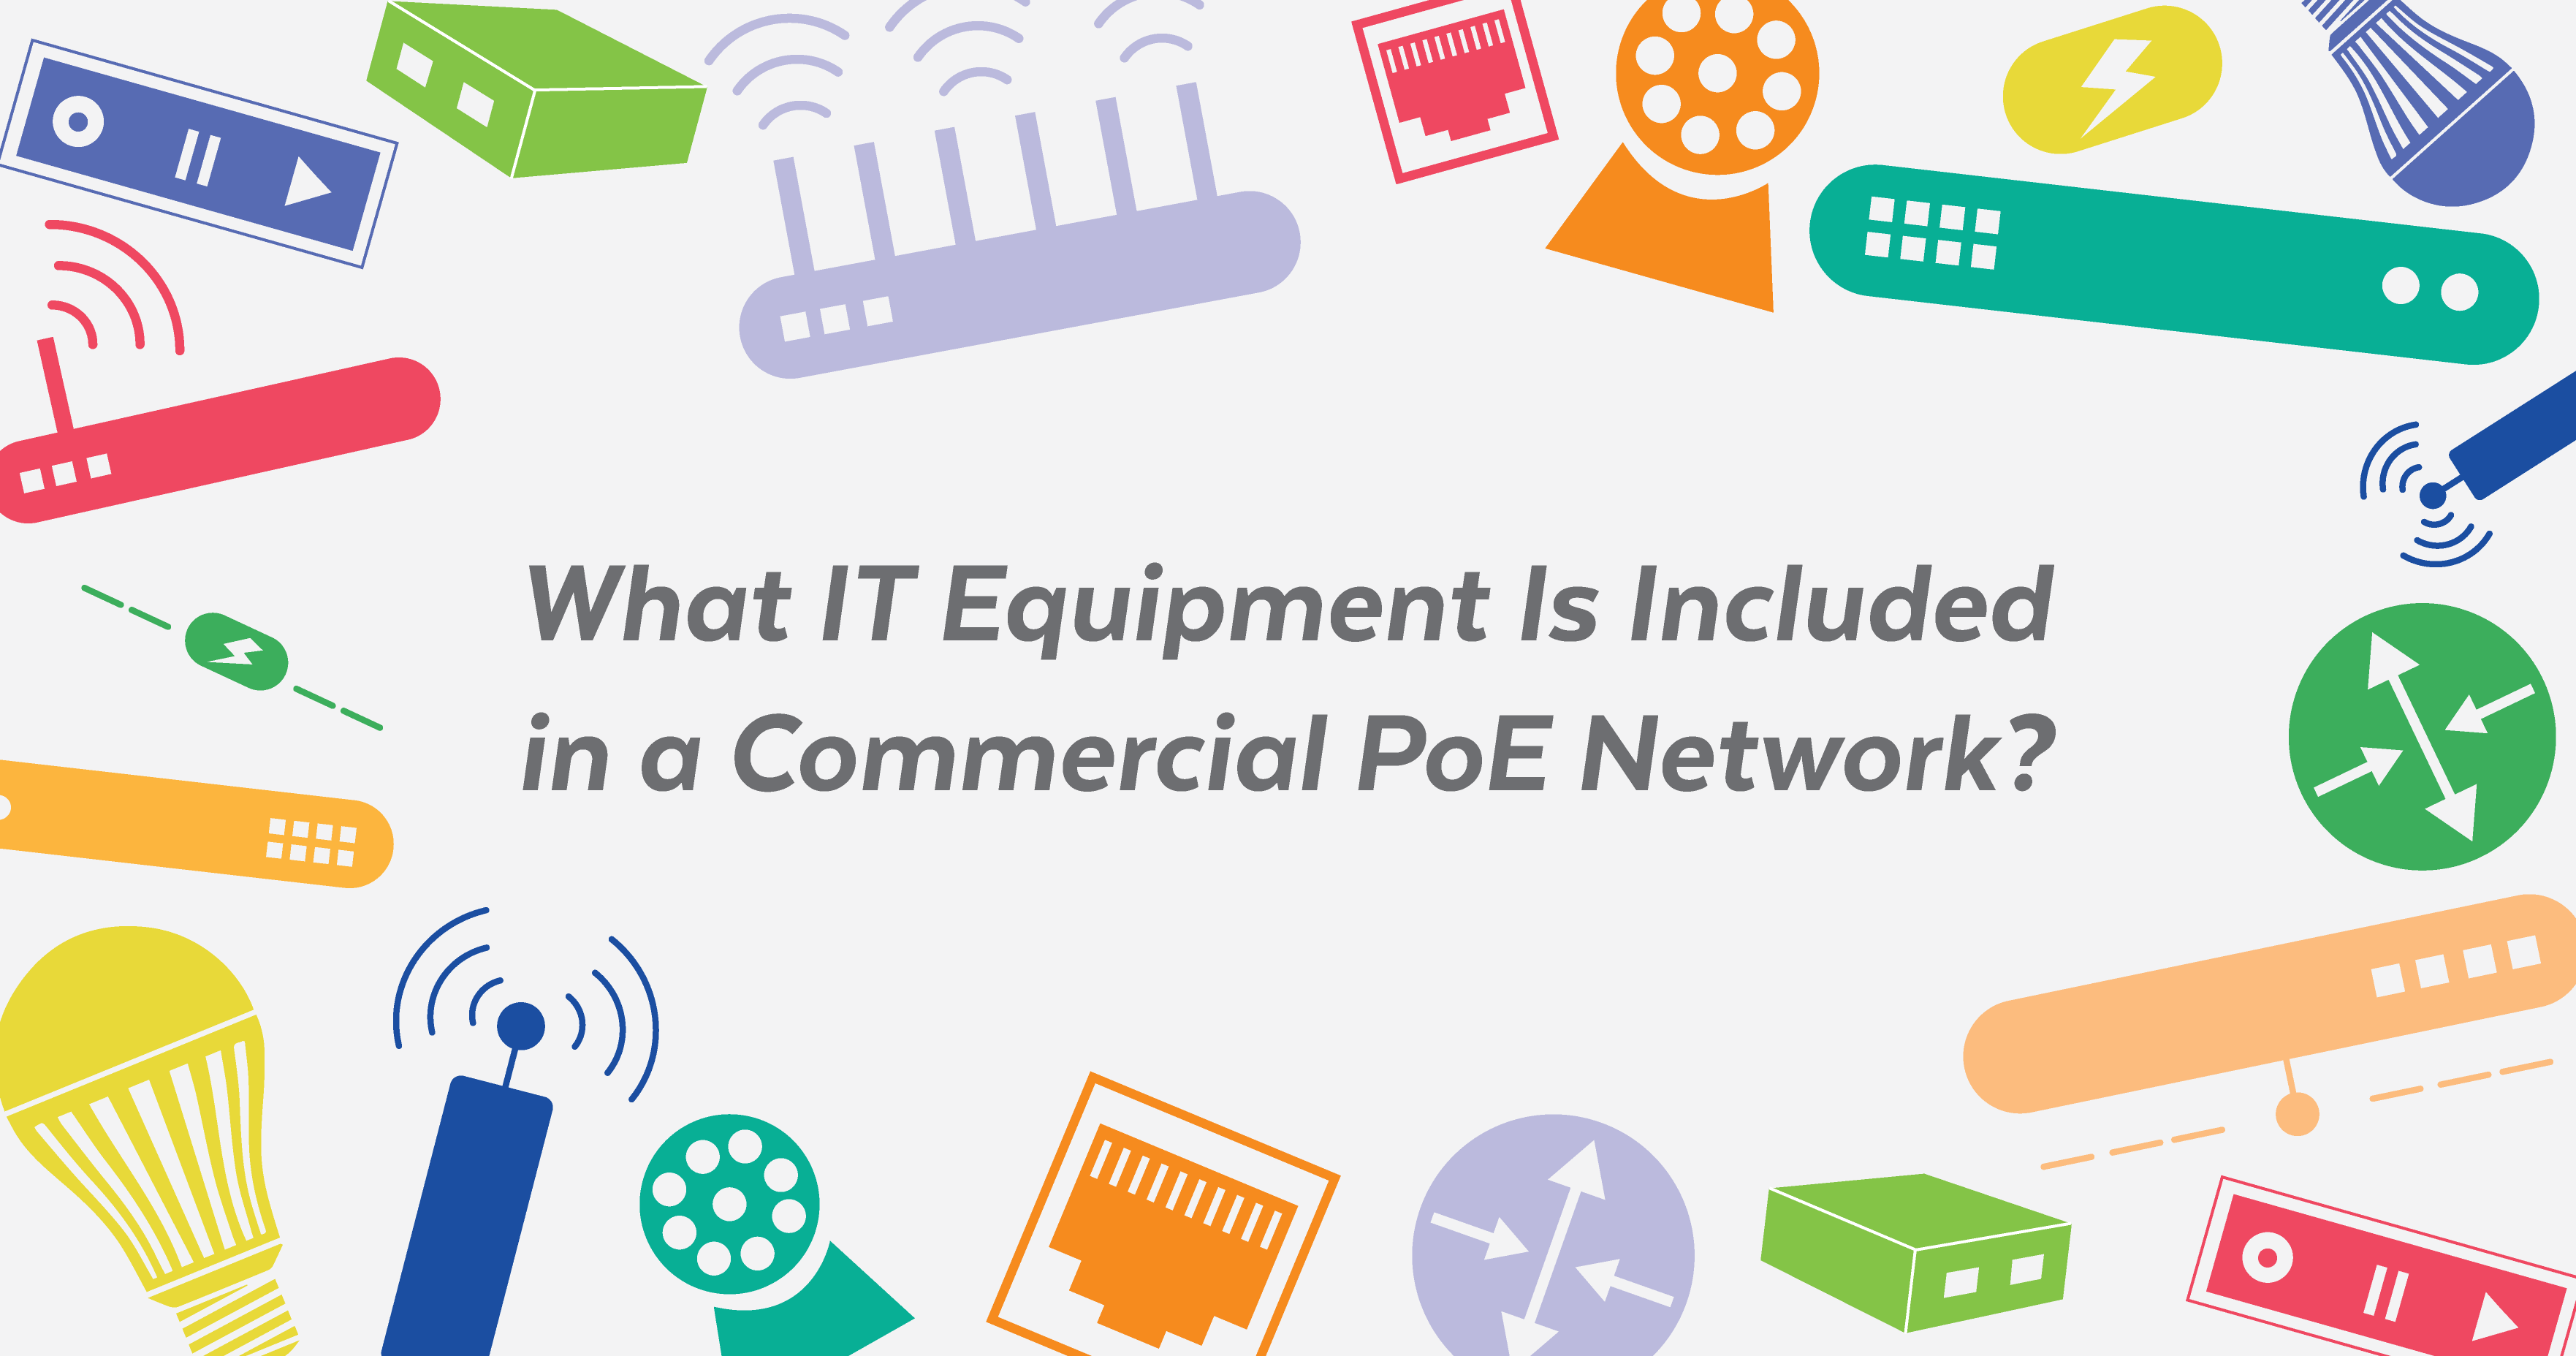 What IT Equipment Is Included in a Commercial PoE Network?